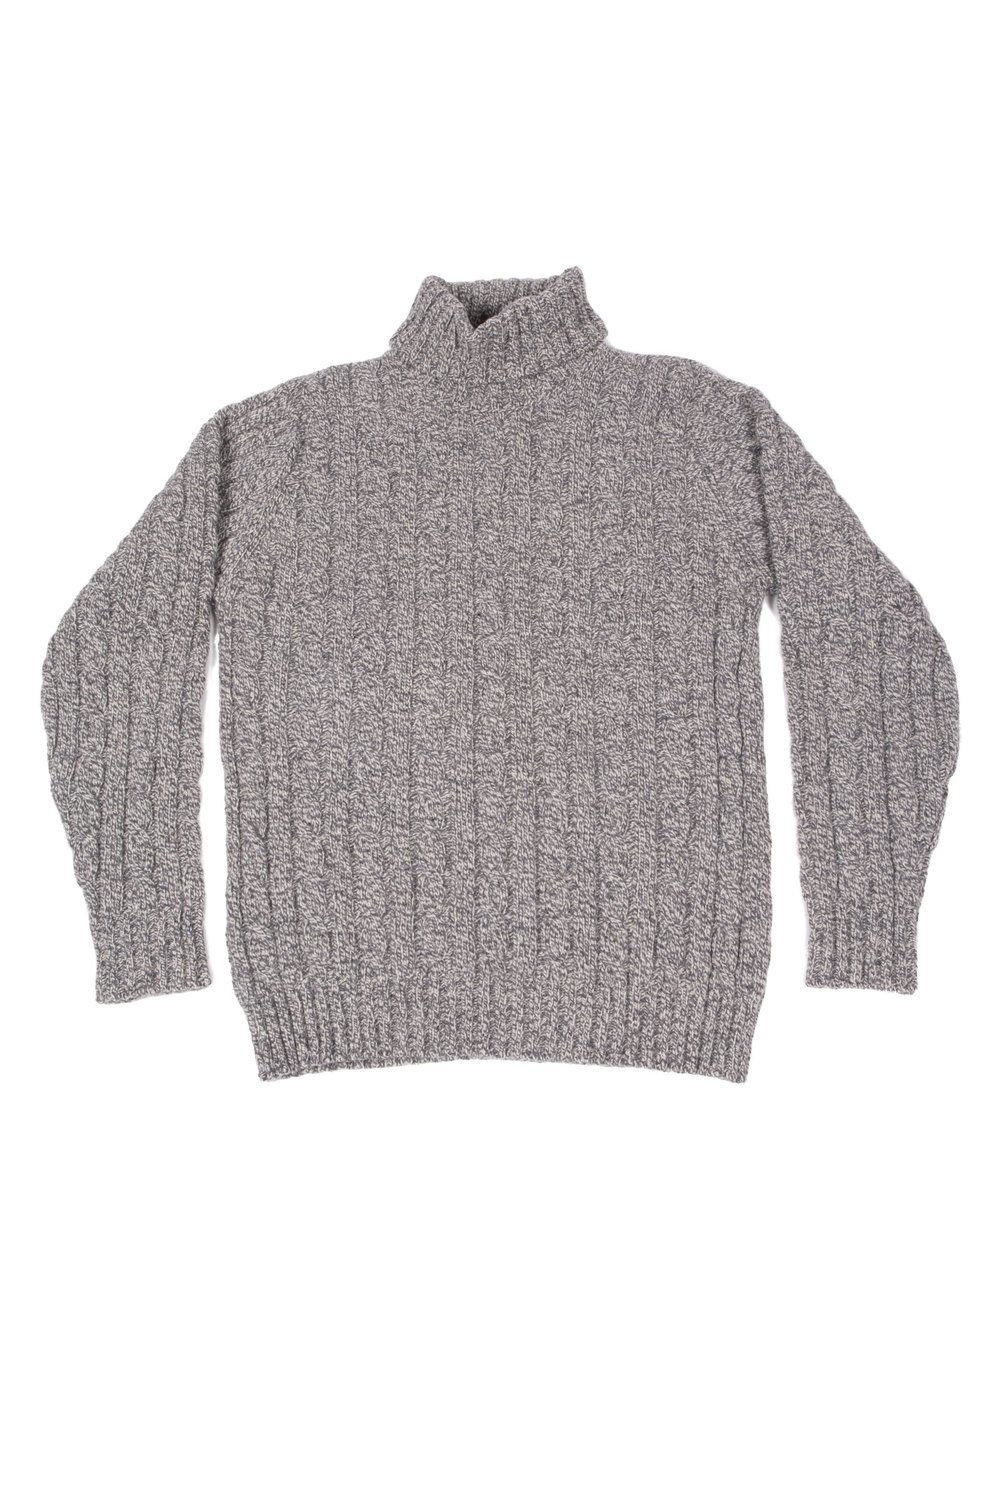 SC&Co. Hamish Cable Knit Roll Neck